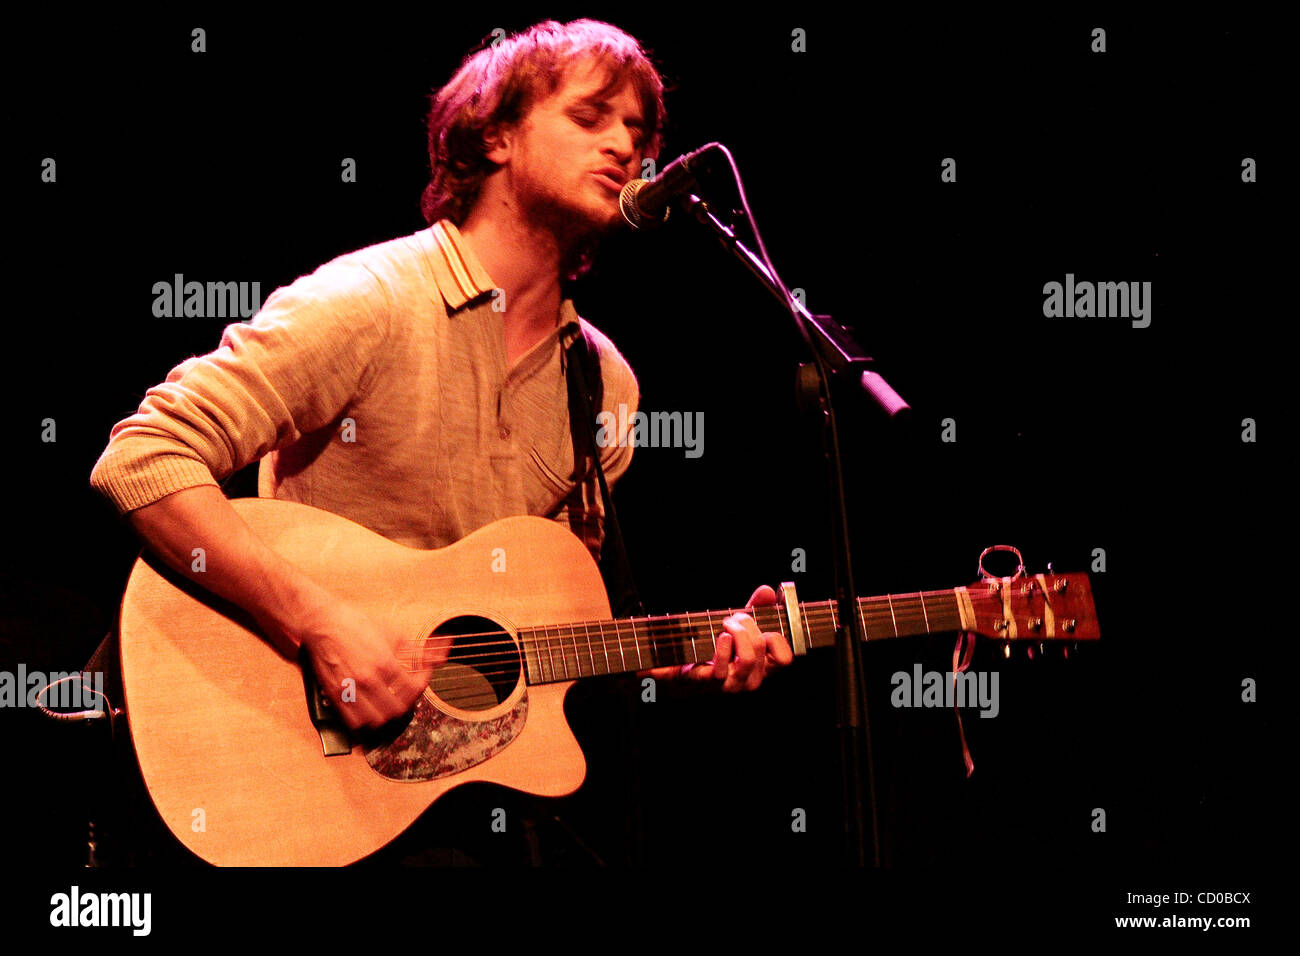 Peasant a.k.a. Damien DeRose performs at The Music Hall of Williamsburg in  the borough of Brooklyn in New York City on April 12, 2010 Stock Photo